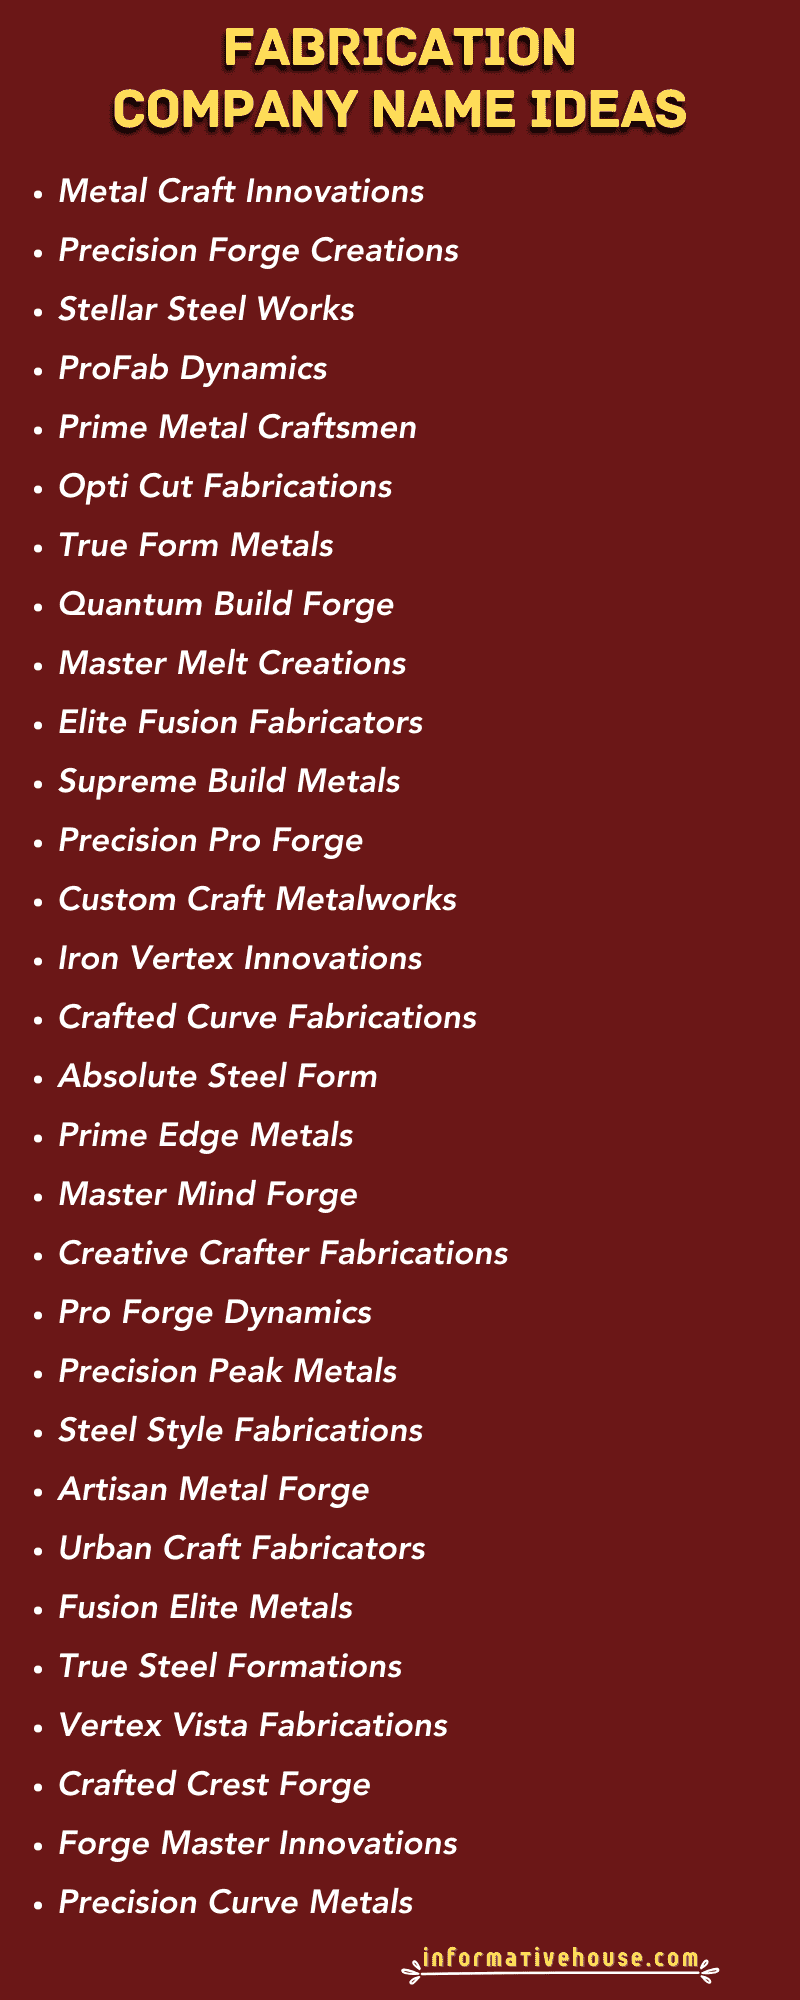 Fabrication Company Name Ideas for startup